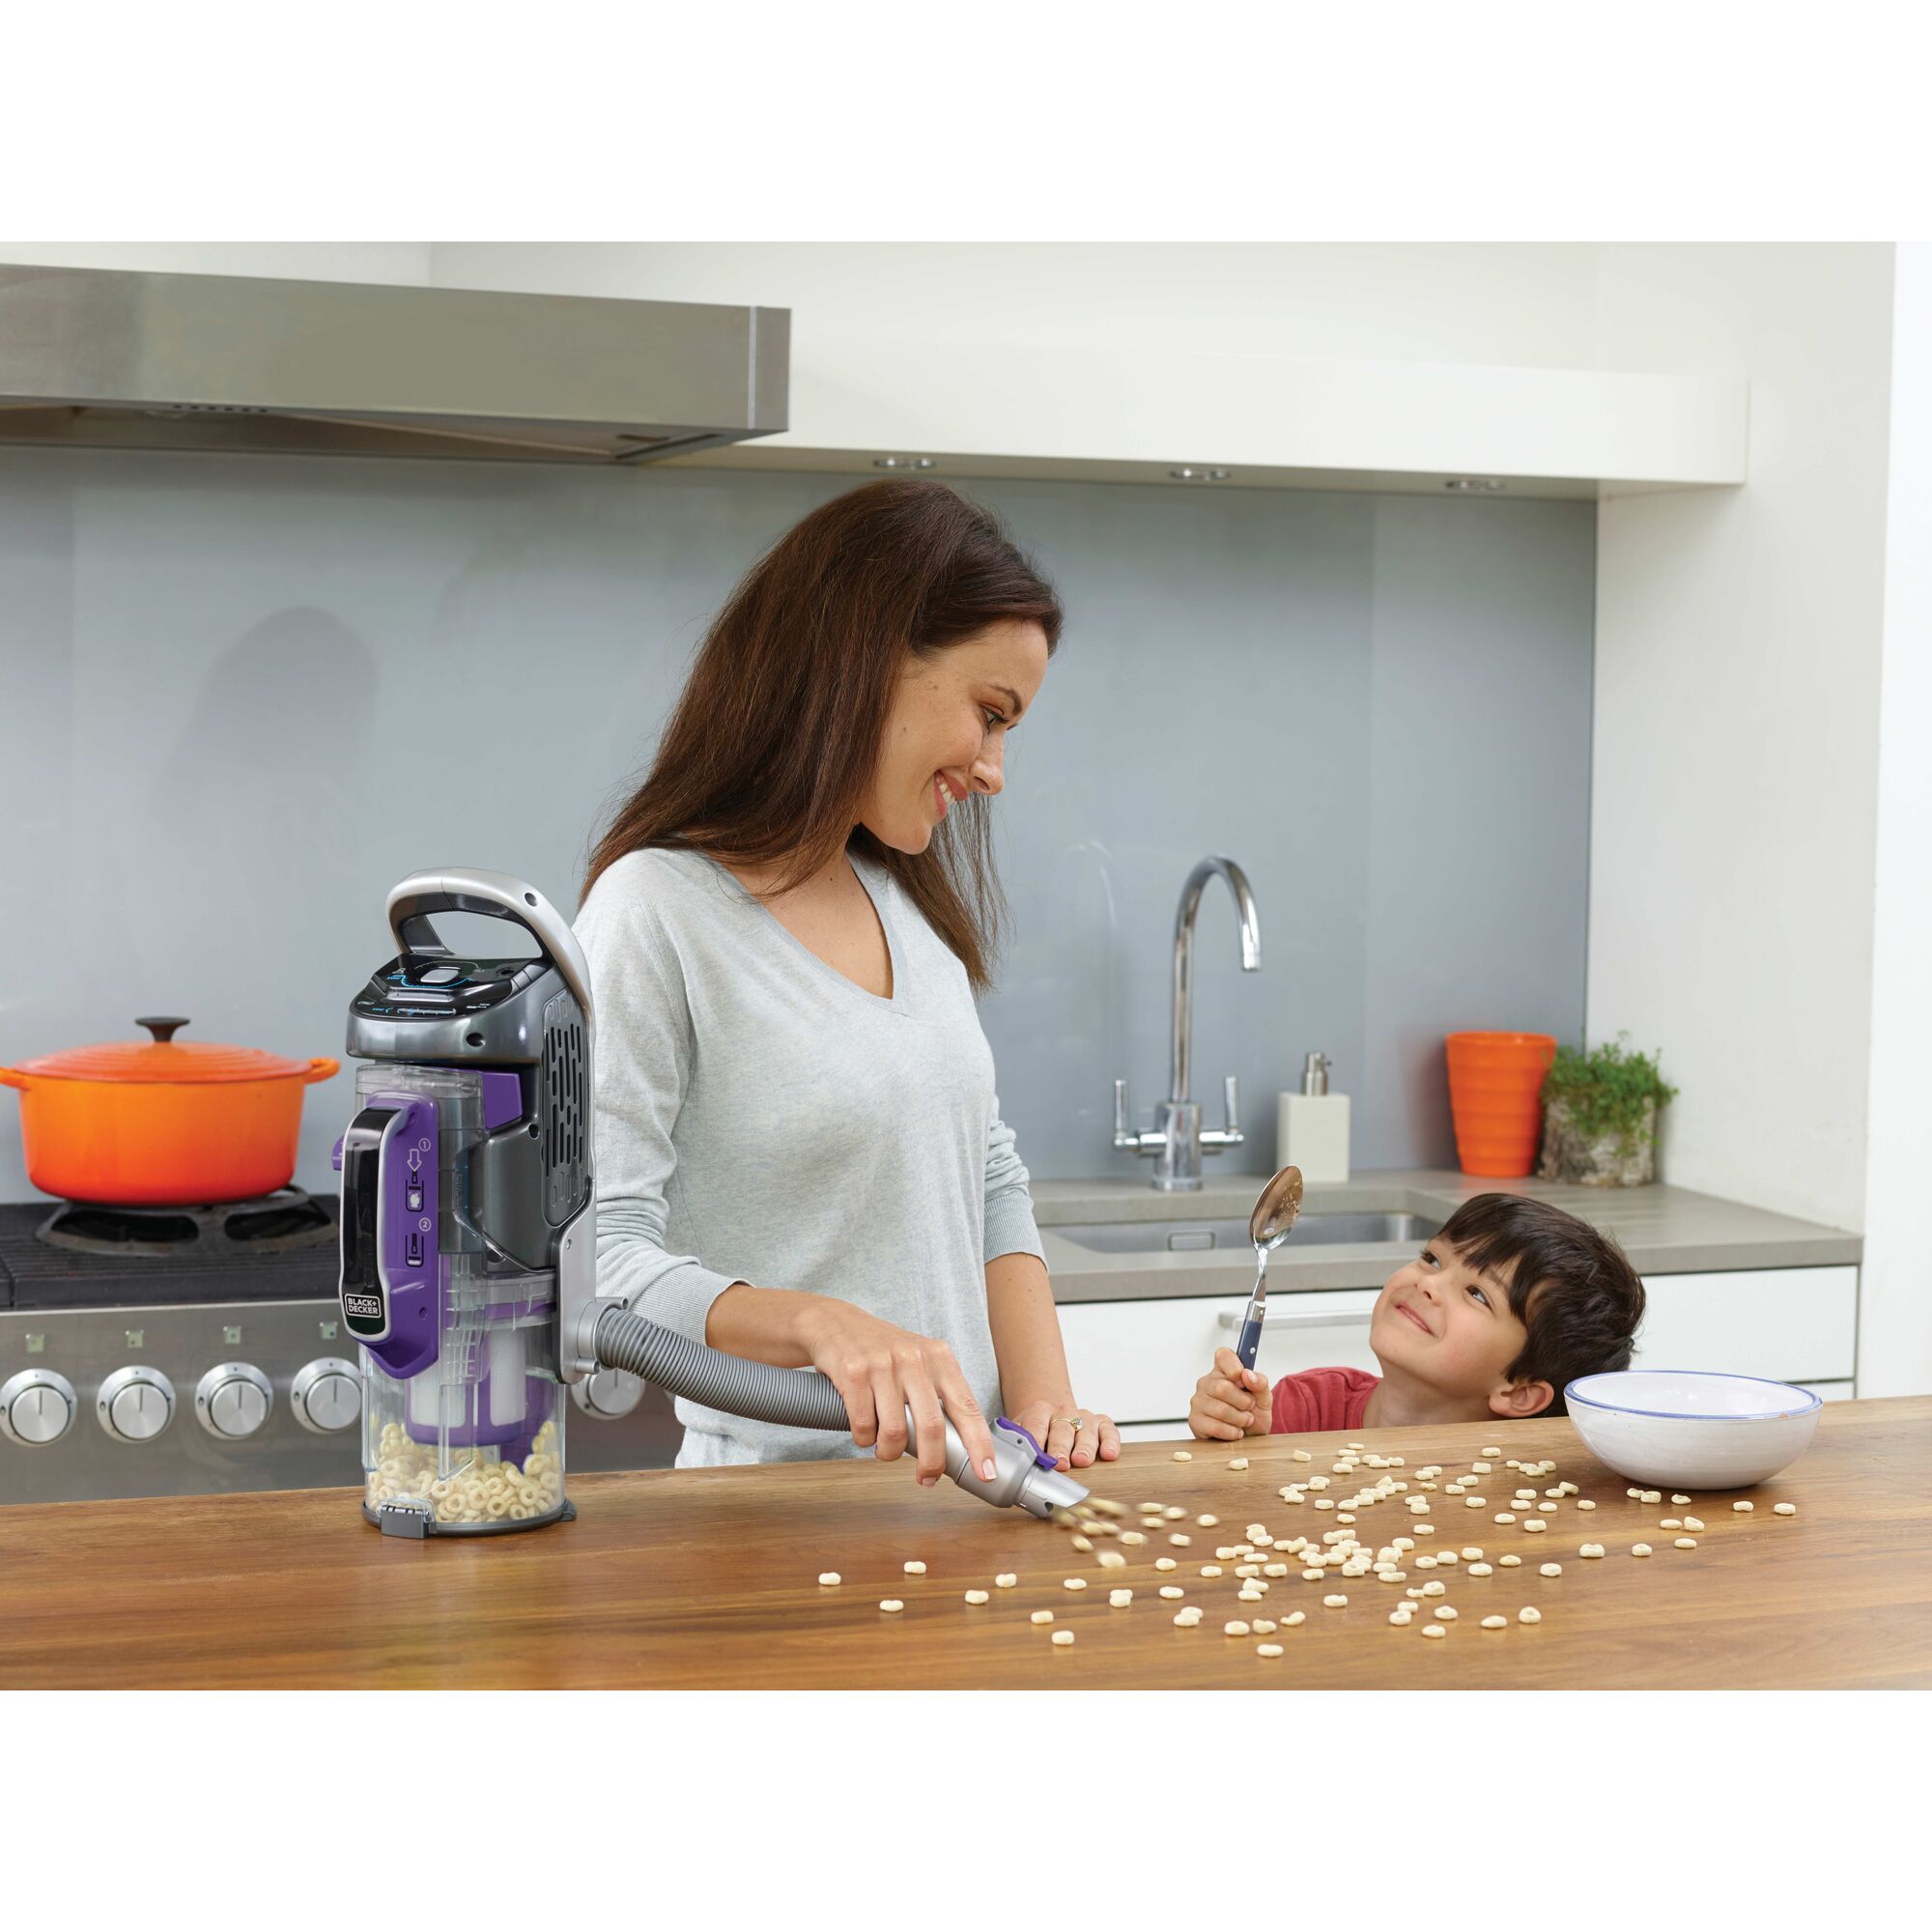 power series pro cordless 2 in 1 pet vacuum being used by a person.